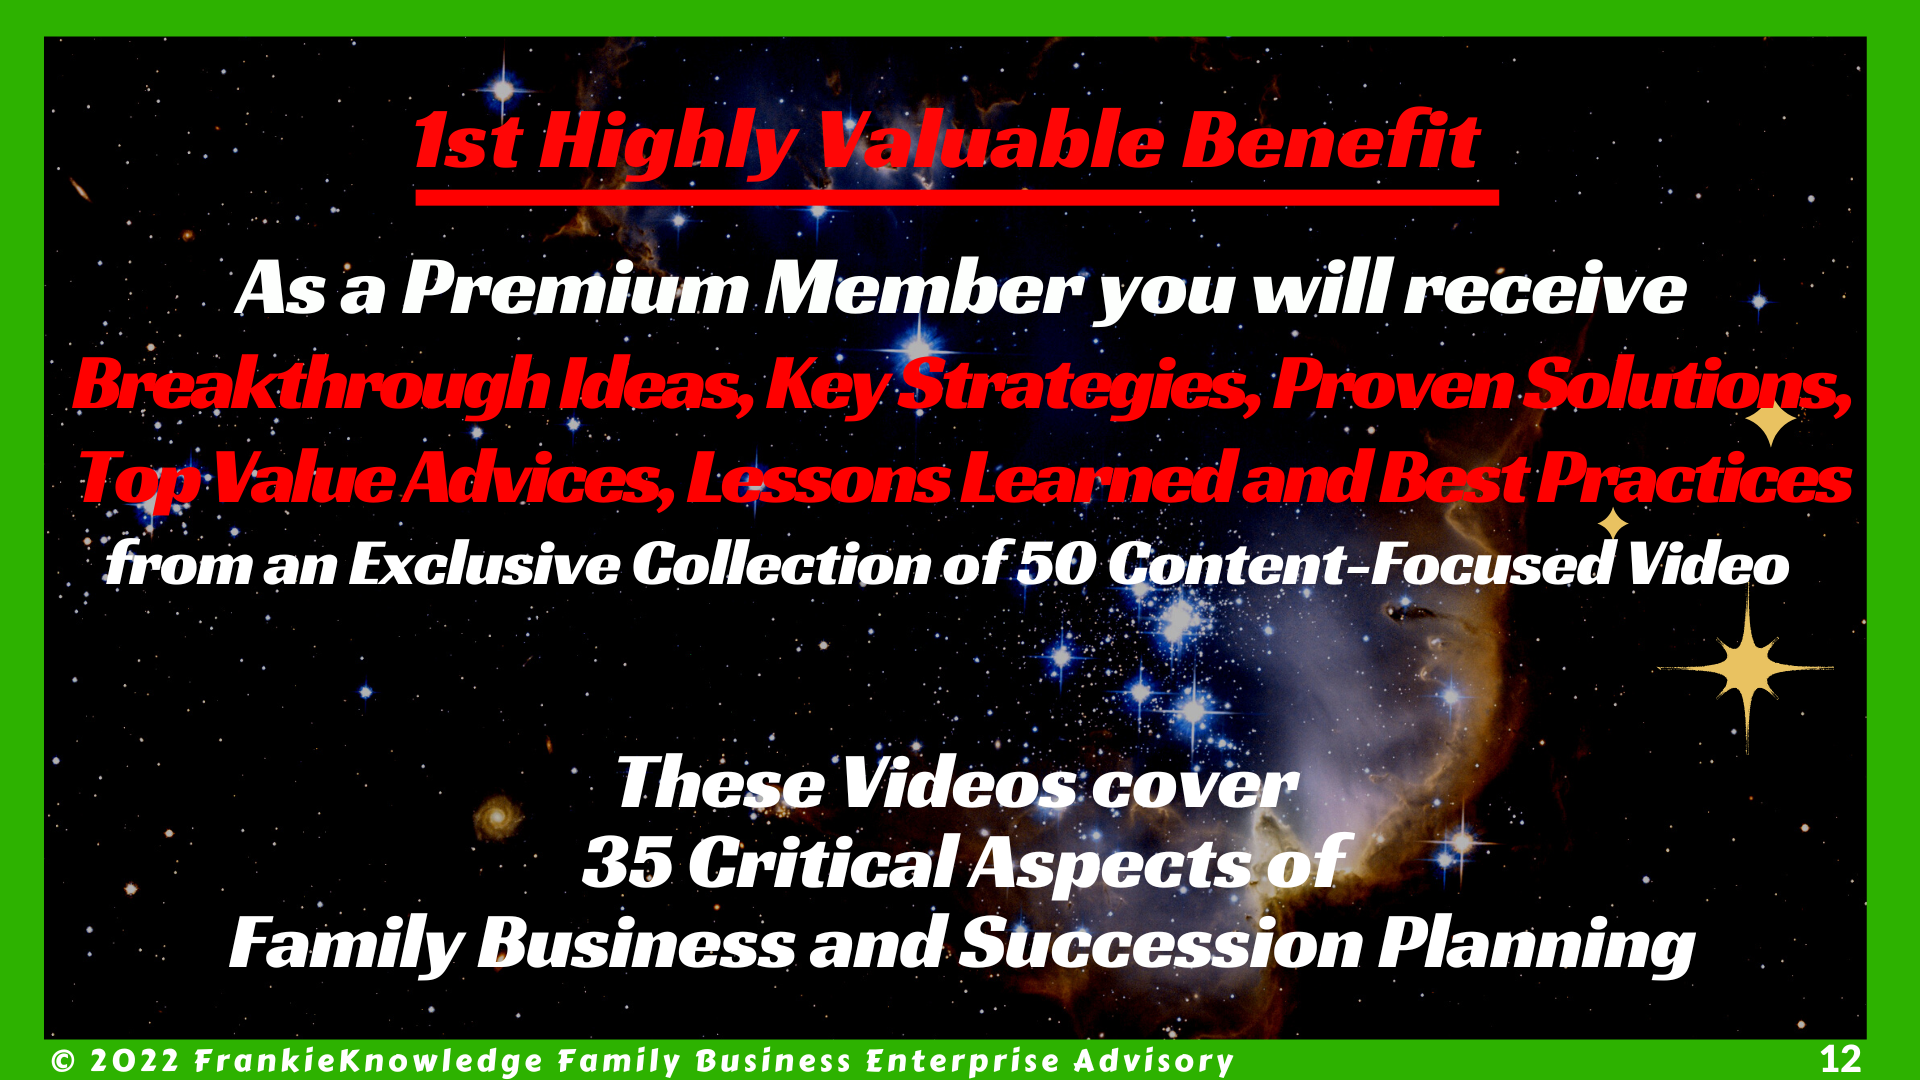 1st Highly Valuable Benefit    As a Premium Member you will receive Breakthrough Ideas, Key Strategies, Proven Solutions, Top Value Advices, Lessons Learned and Best Practices from an Exclusive Collection of 50 Content-Focused Videos   These Videos cover  35 Critical Aspects of Family Business and Succession Planning 2